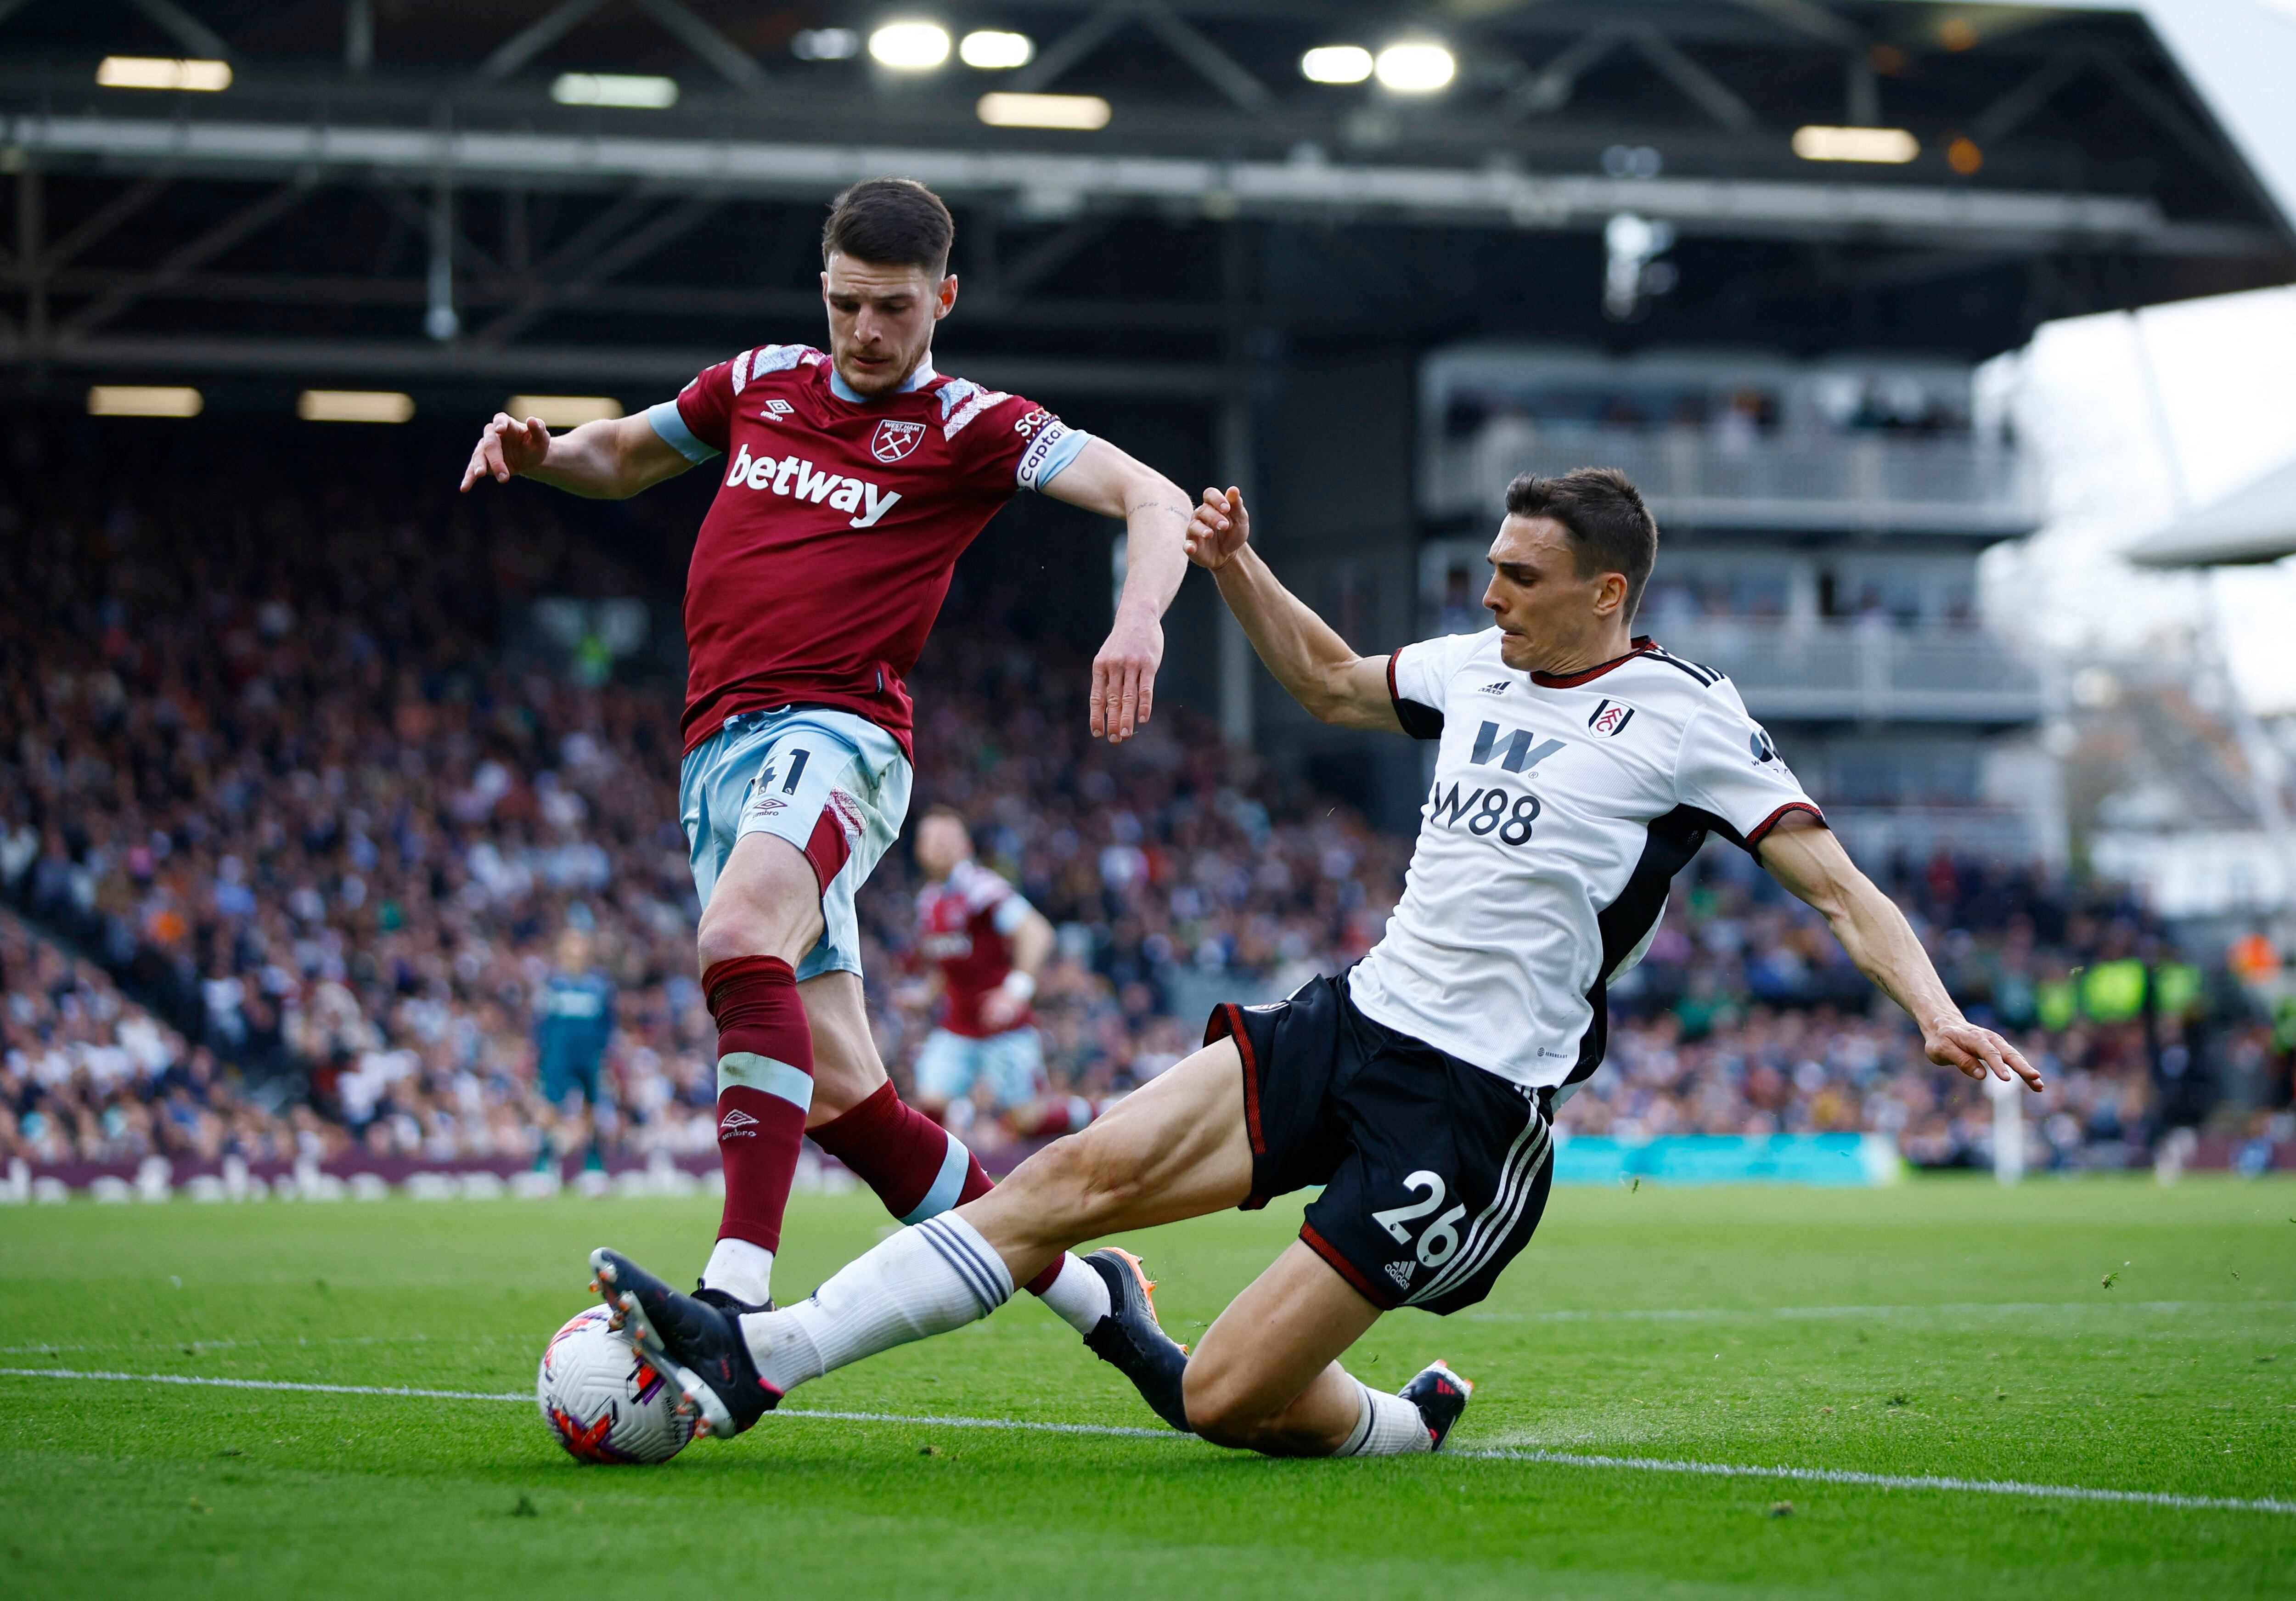 Soccer Football - Premier League - Fulham v West Ham United - Craven Cottage, London, Britain - April 8, 2023 West Ham United's Declan Rice in action with Fulham's Joao Palhinha Action Images via Reuters/John Sibley EDITORIAL USE ONLY. No use with unauthorized audio, video, data, fixture lists, club/league logos or 'live' services. Online in-match use limited to 75 images, no video emulation. No use in betting, games or single club /league/player publications.  Please contact your account representative for further details.